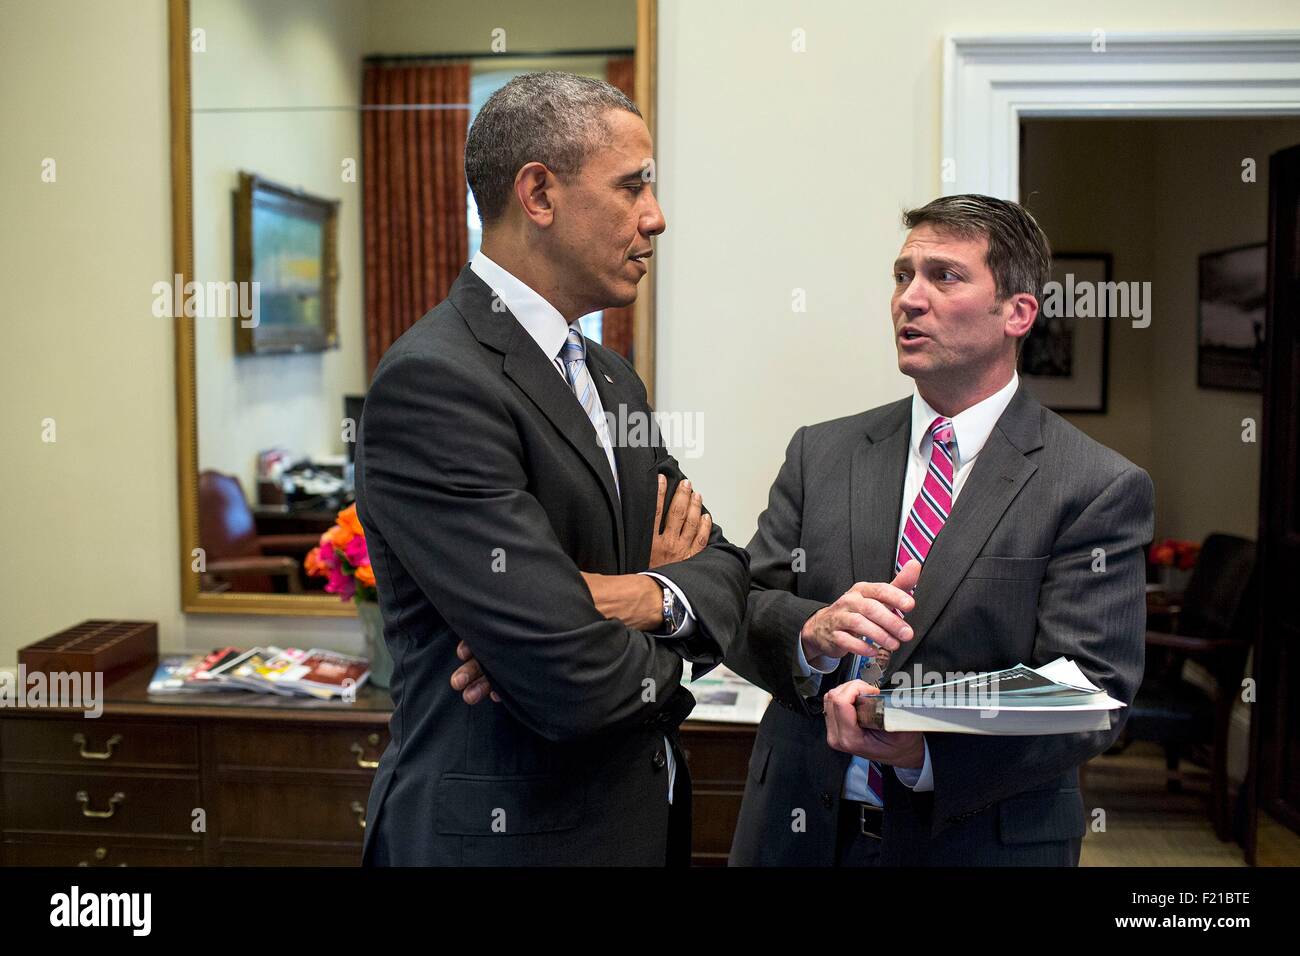 U.S. President Barack Obama speaks with his personal physician Dr. Ronny Jackson in the Outer Oval Office of the White House February 21, 2014 in Washington, DC. Stock Photo